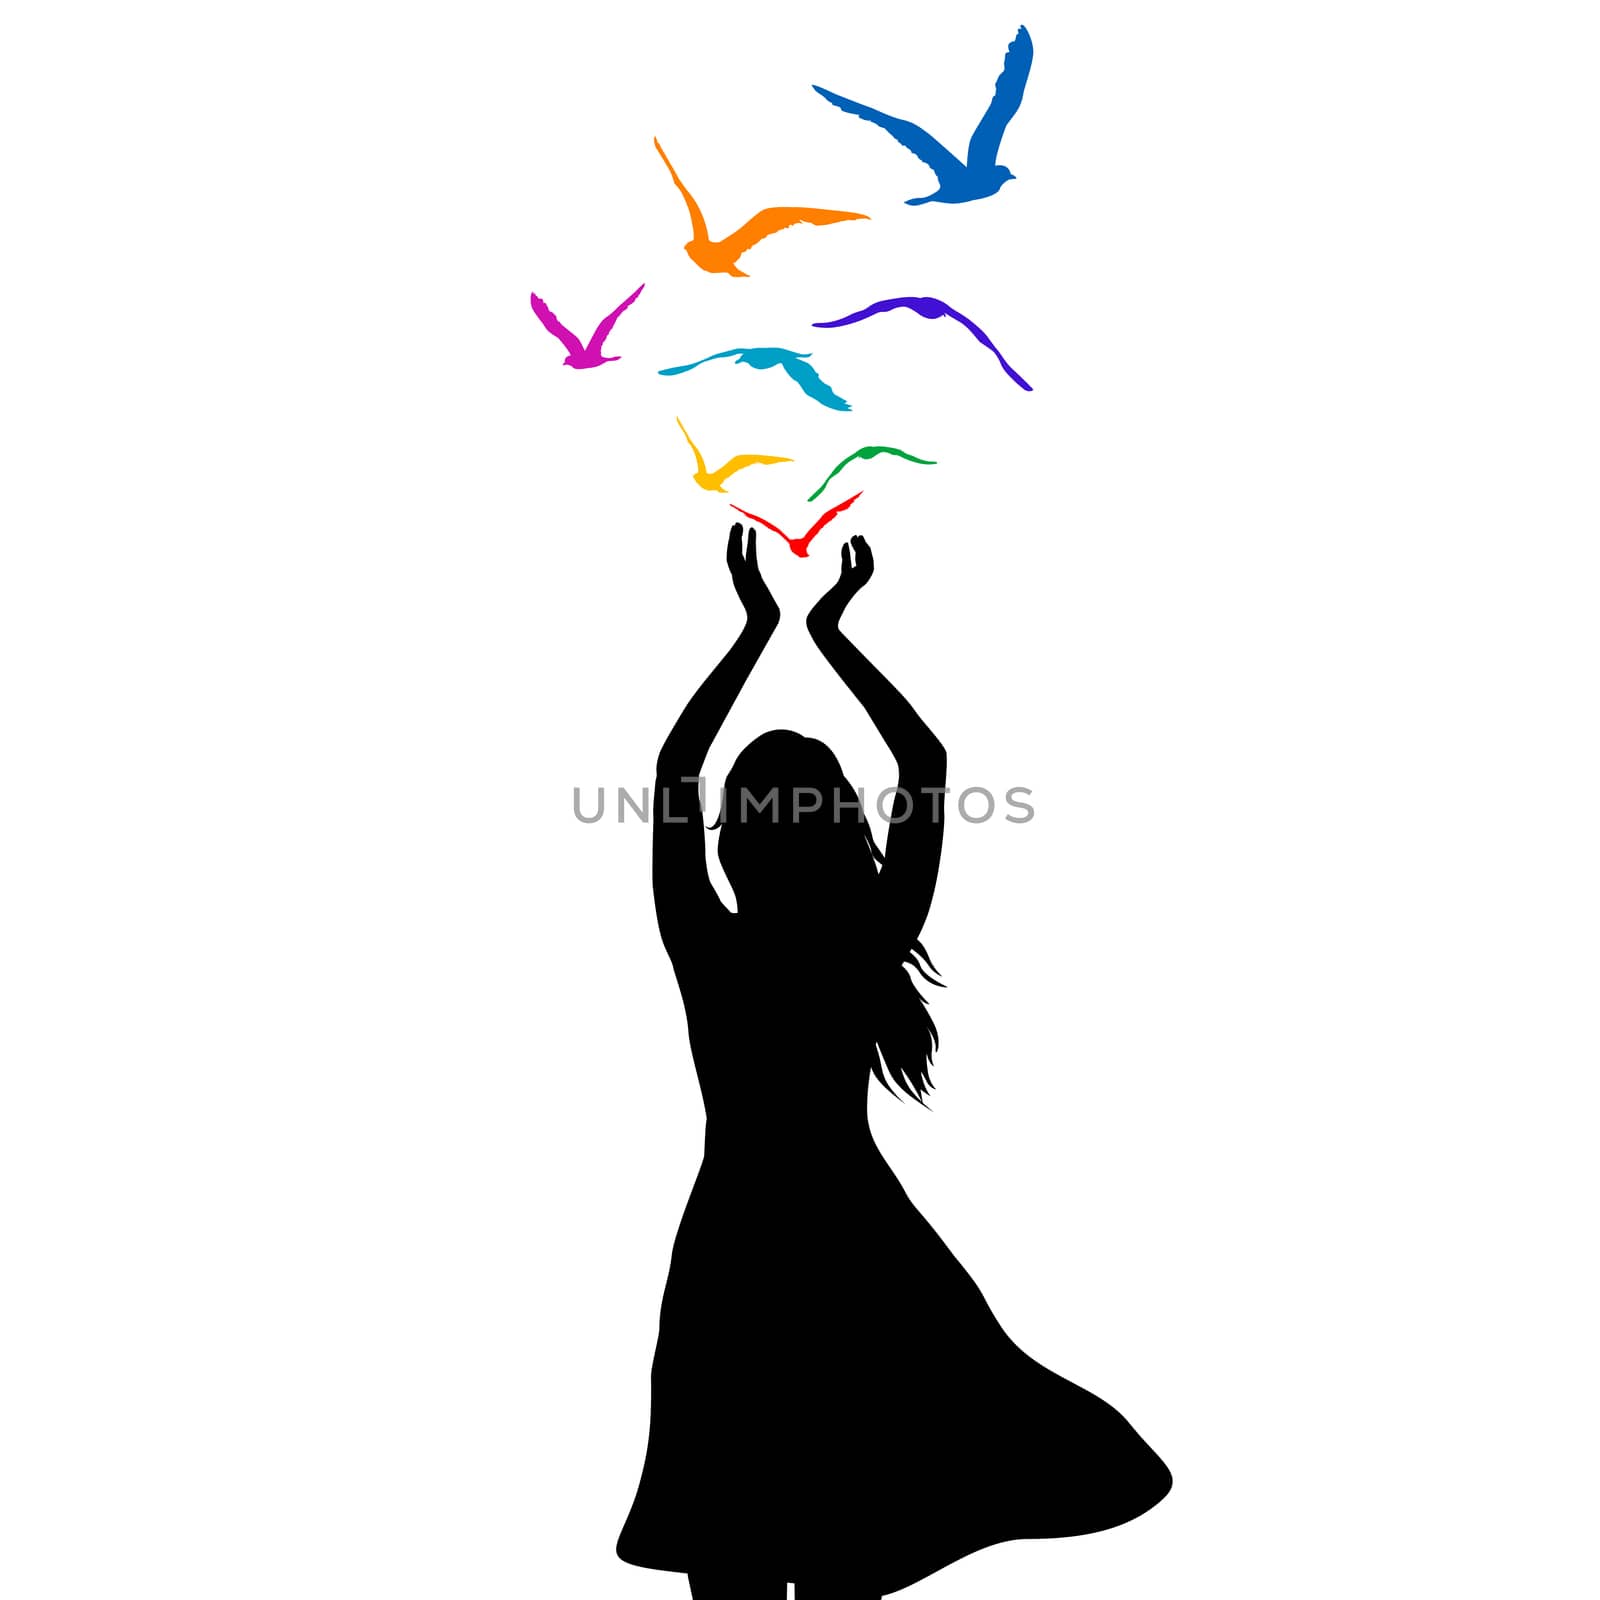 Abstract illustration of a woman silhouette with birds flying fr by hibrida13